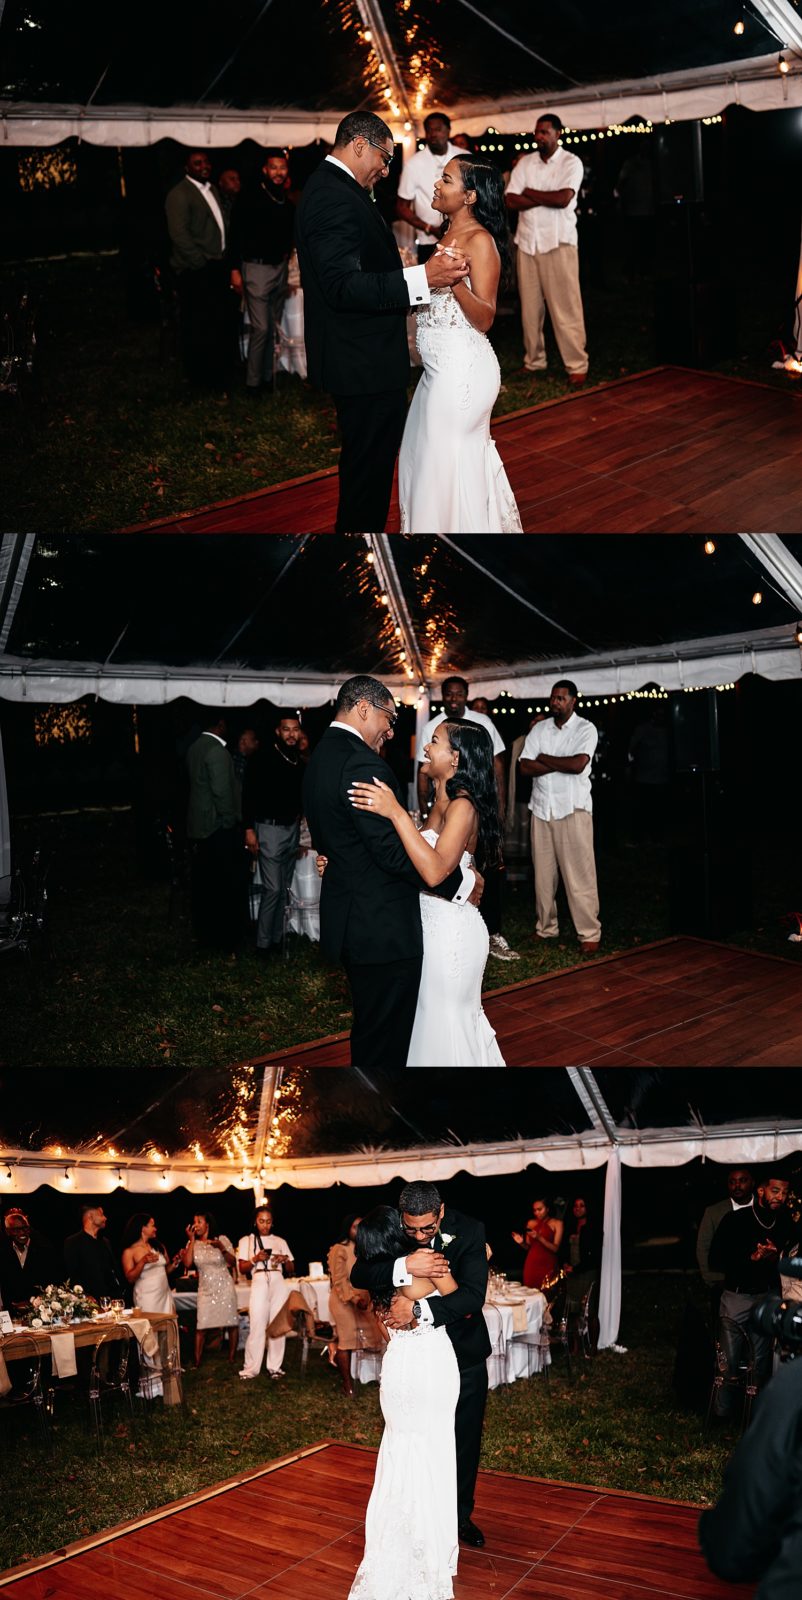 Bride and groom sharing their first dance under a clear tent reception in Houston, Texas.